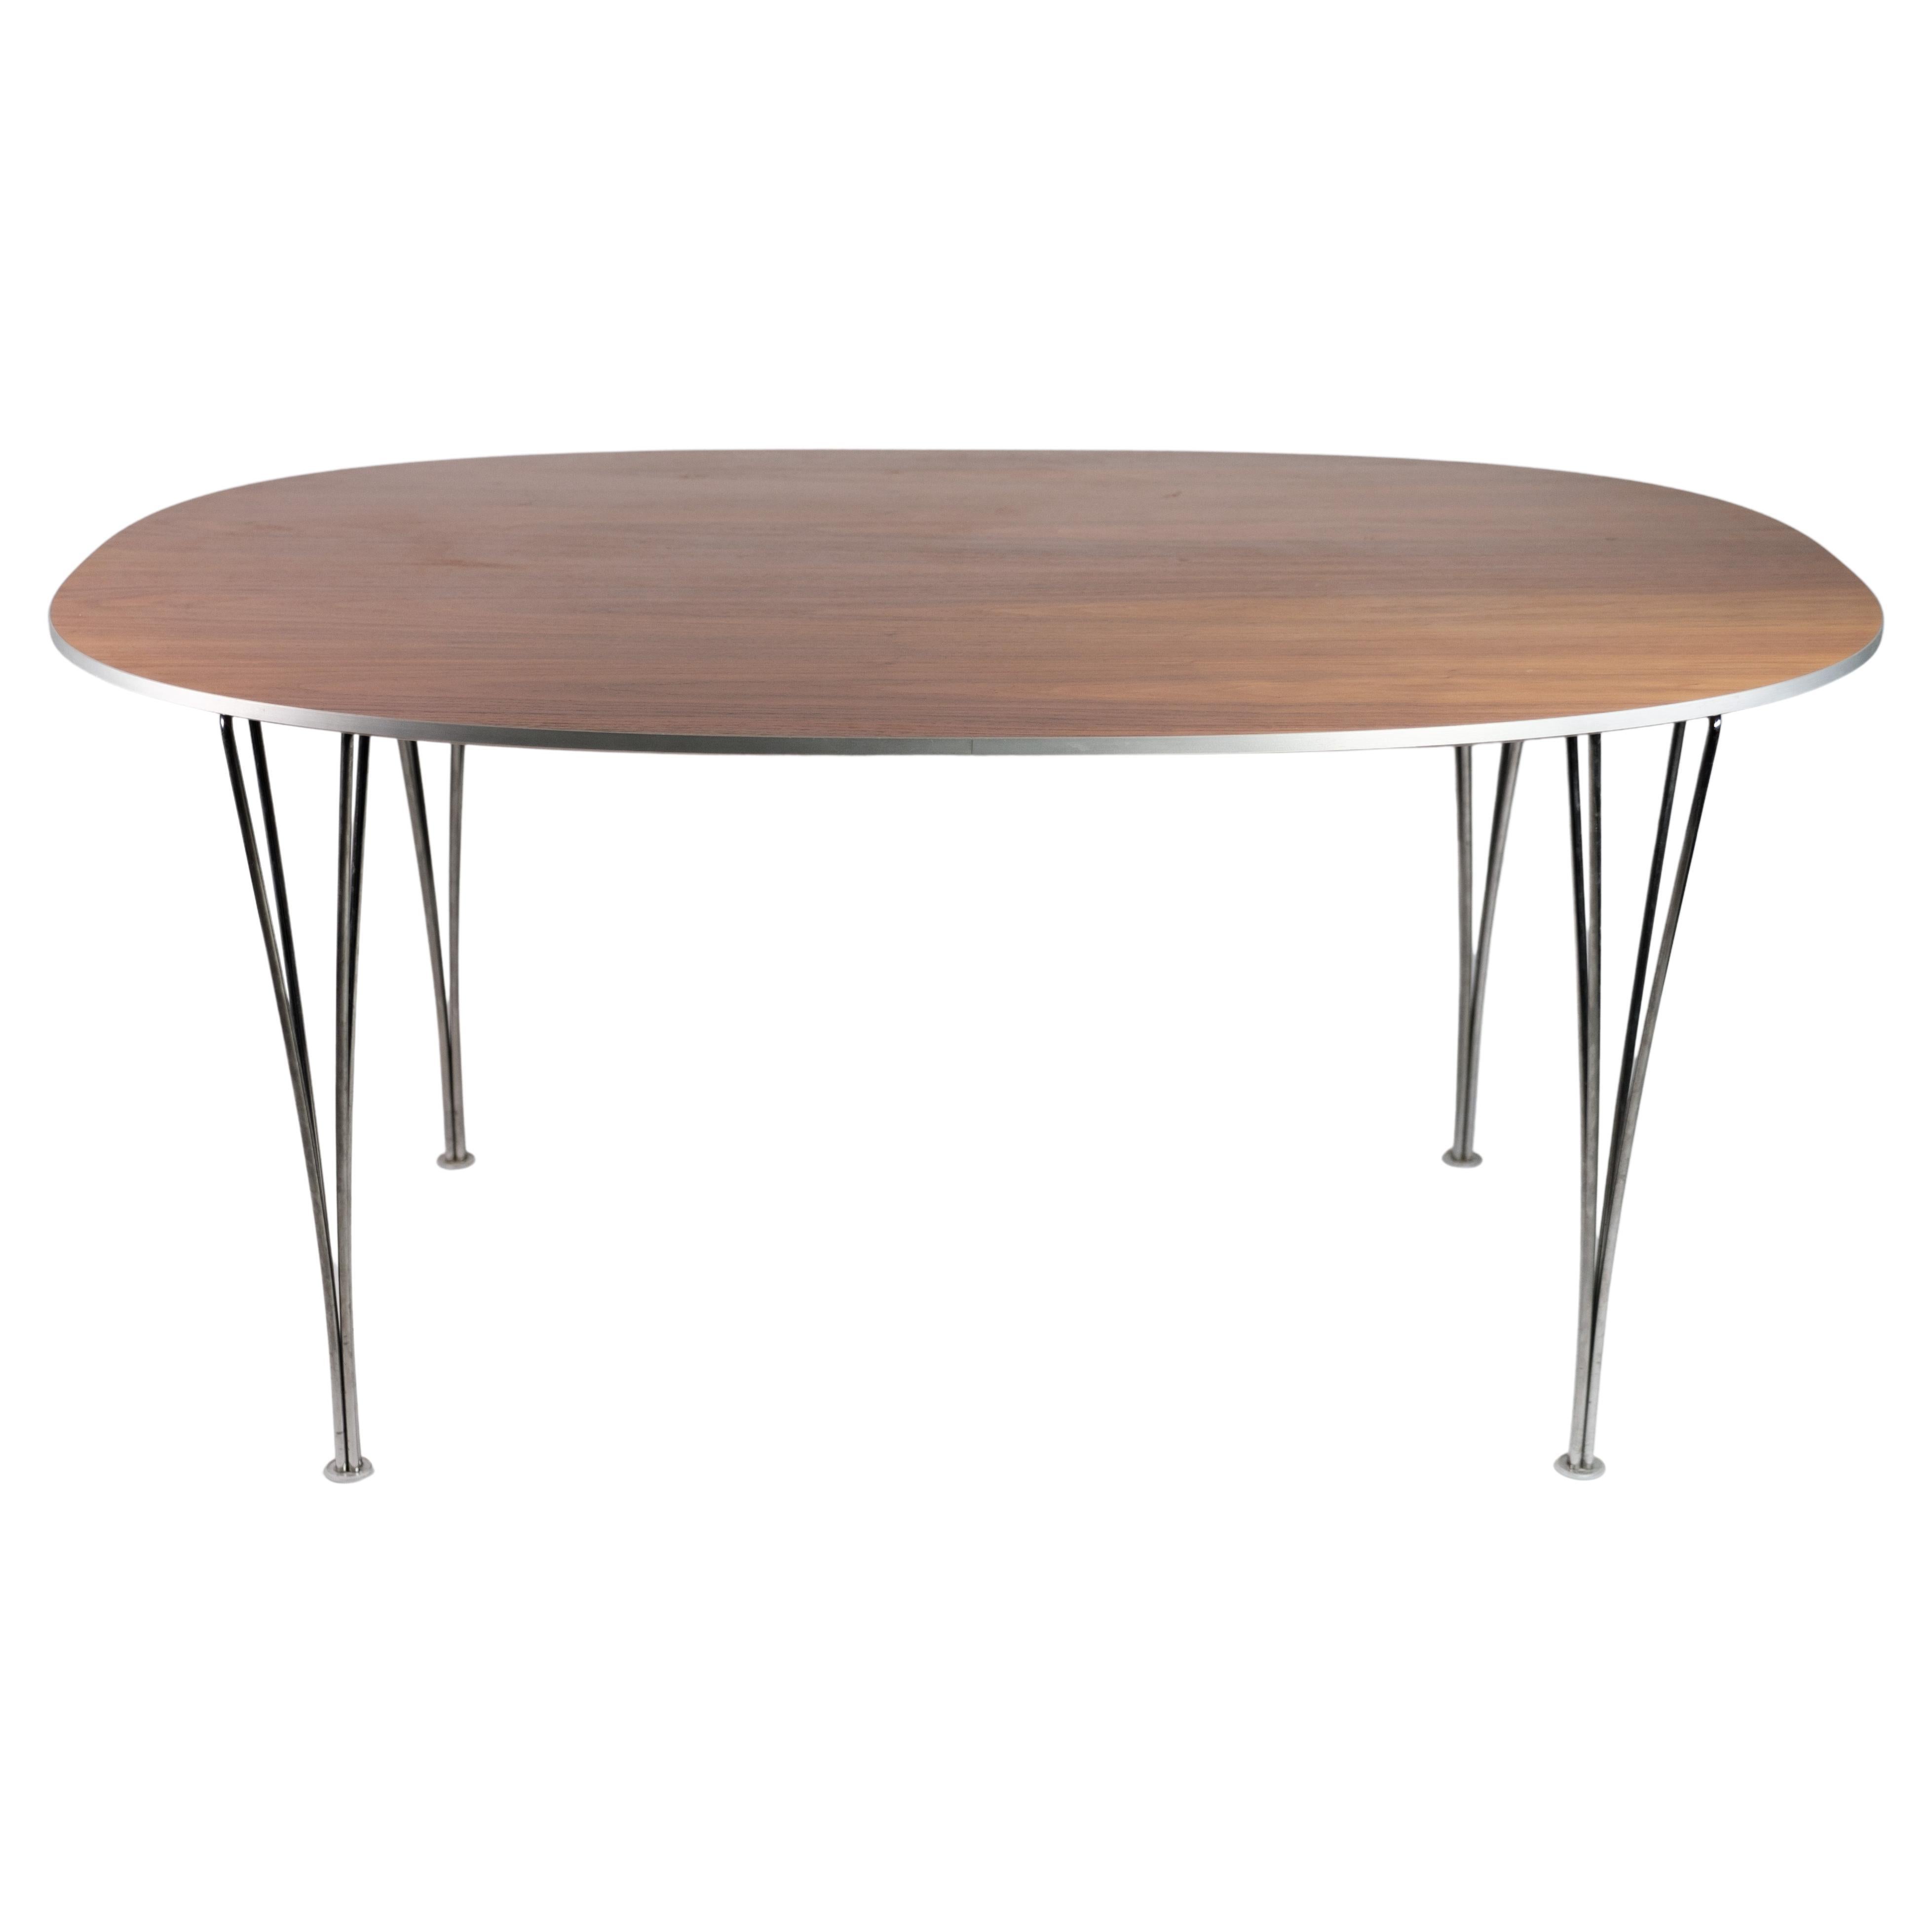 Piet Hein Table, Model B612 with Walnut Surface and Steel Legs